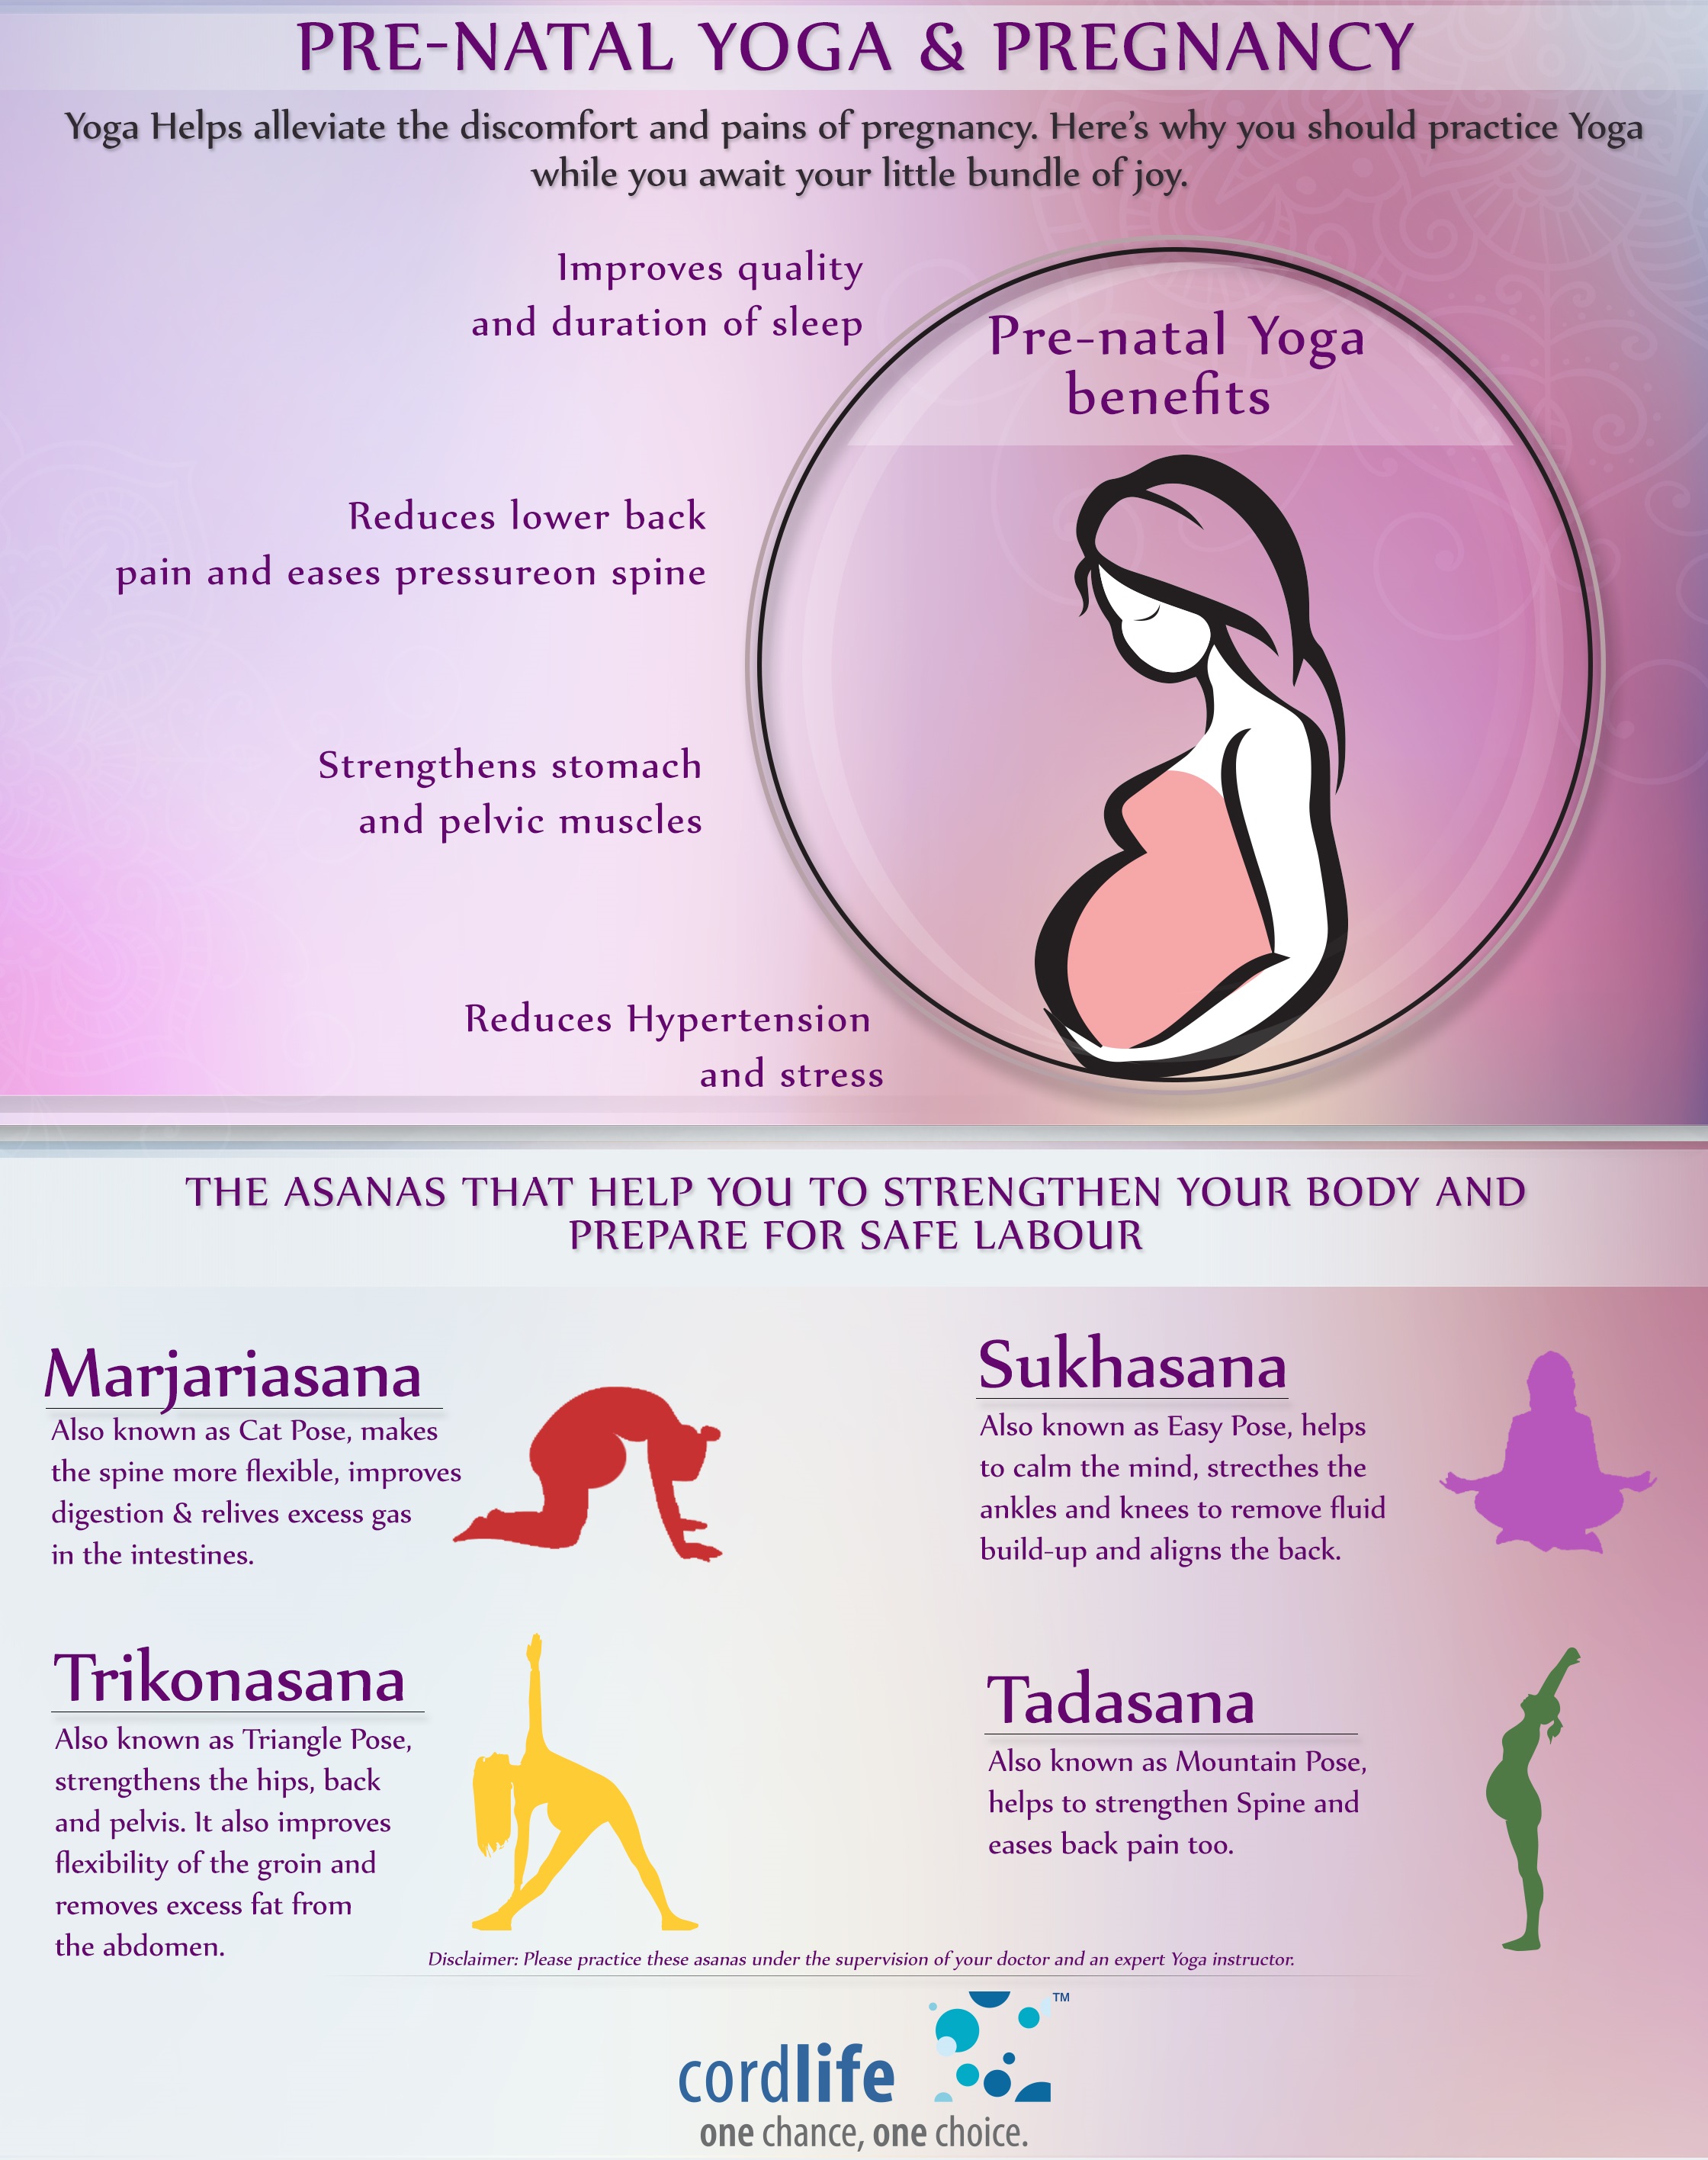 Yoga Poses During Pregnancy and Pre-natal @ Cordlife India